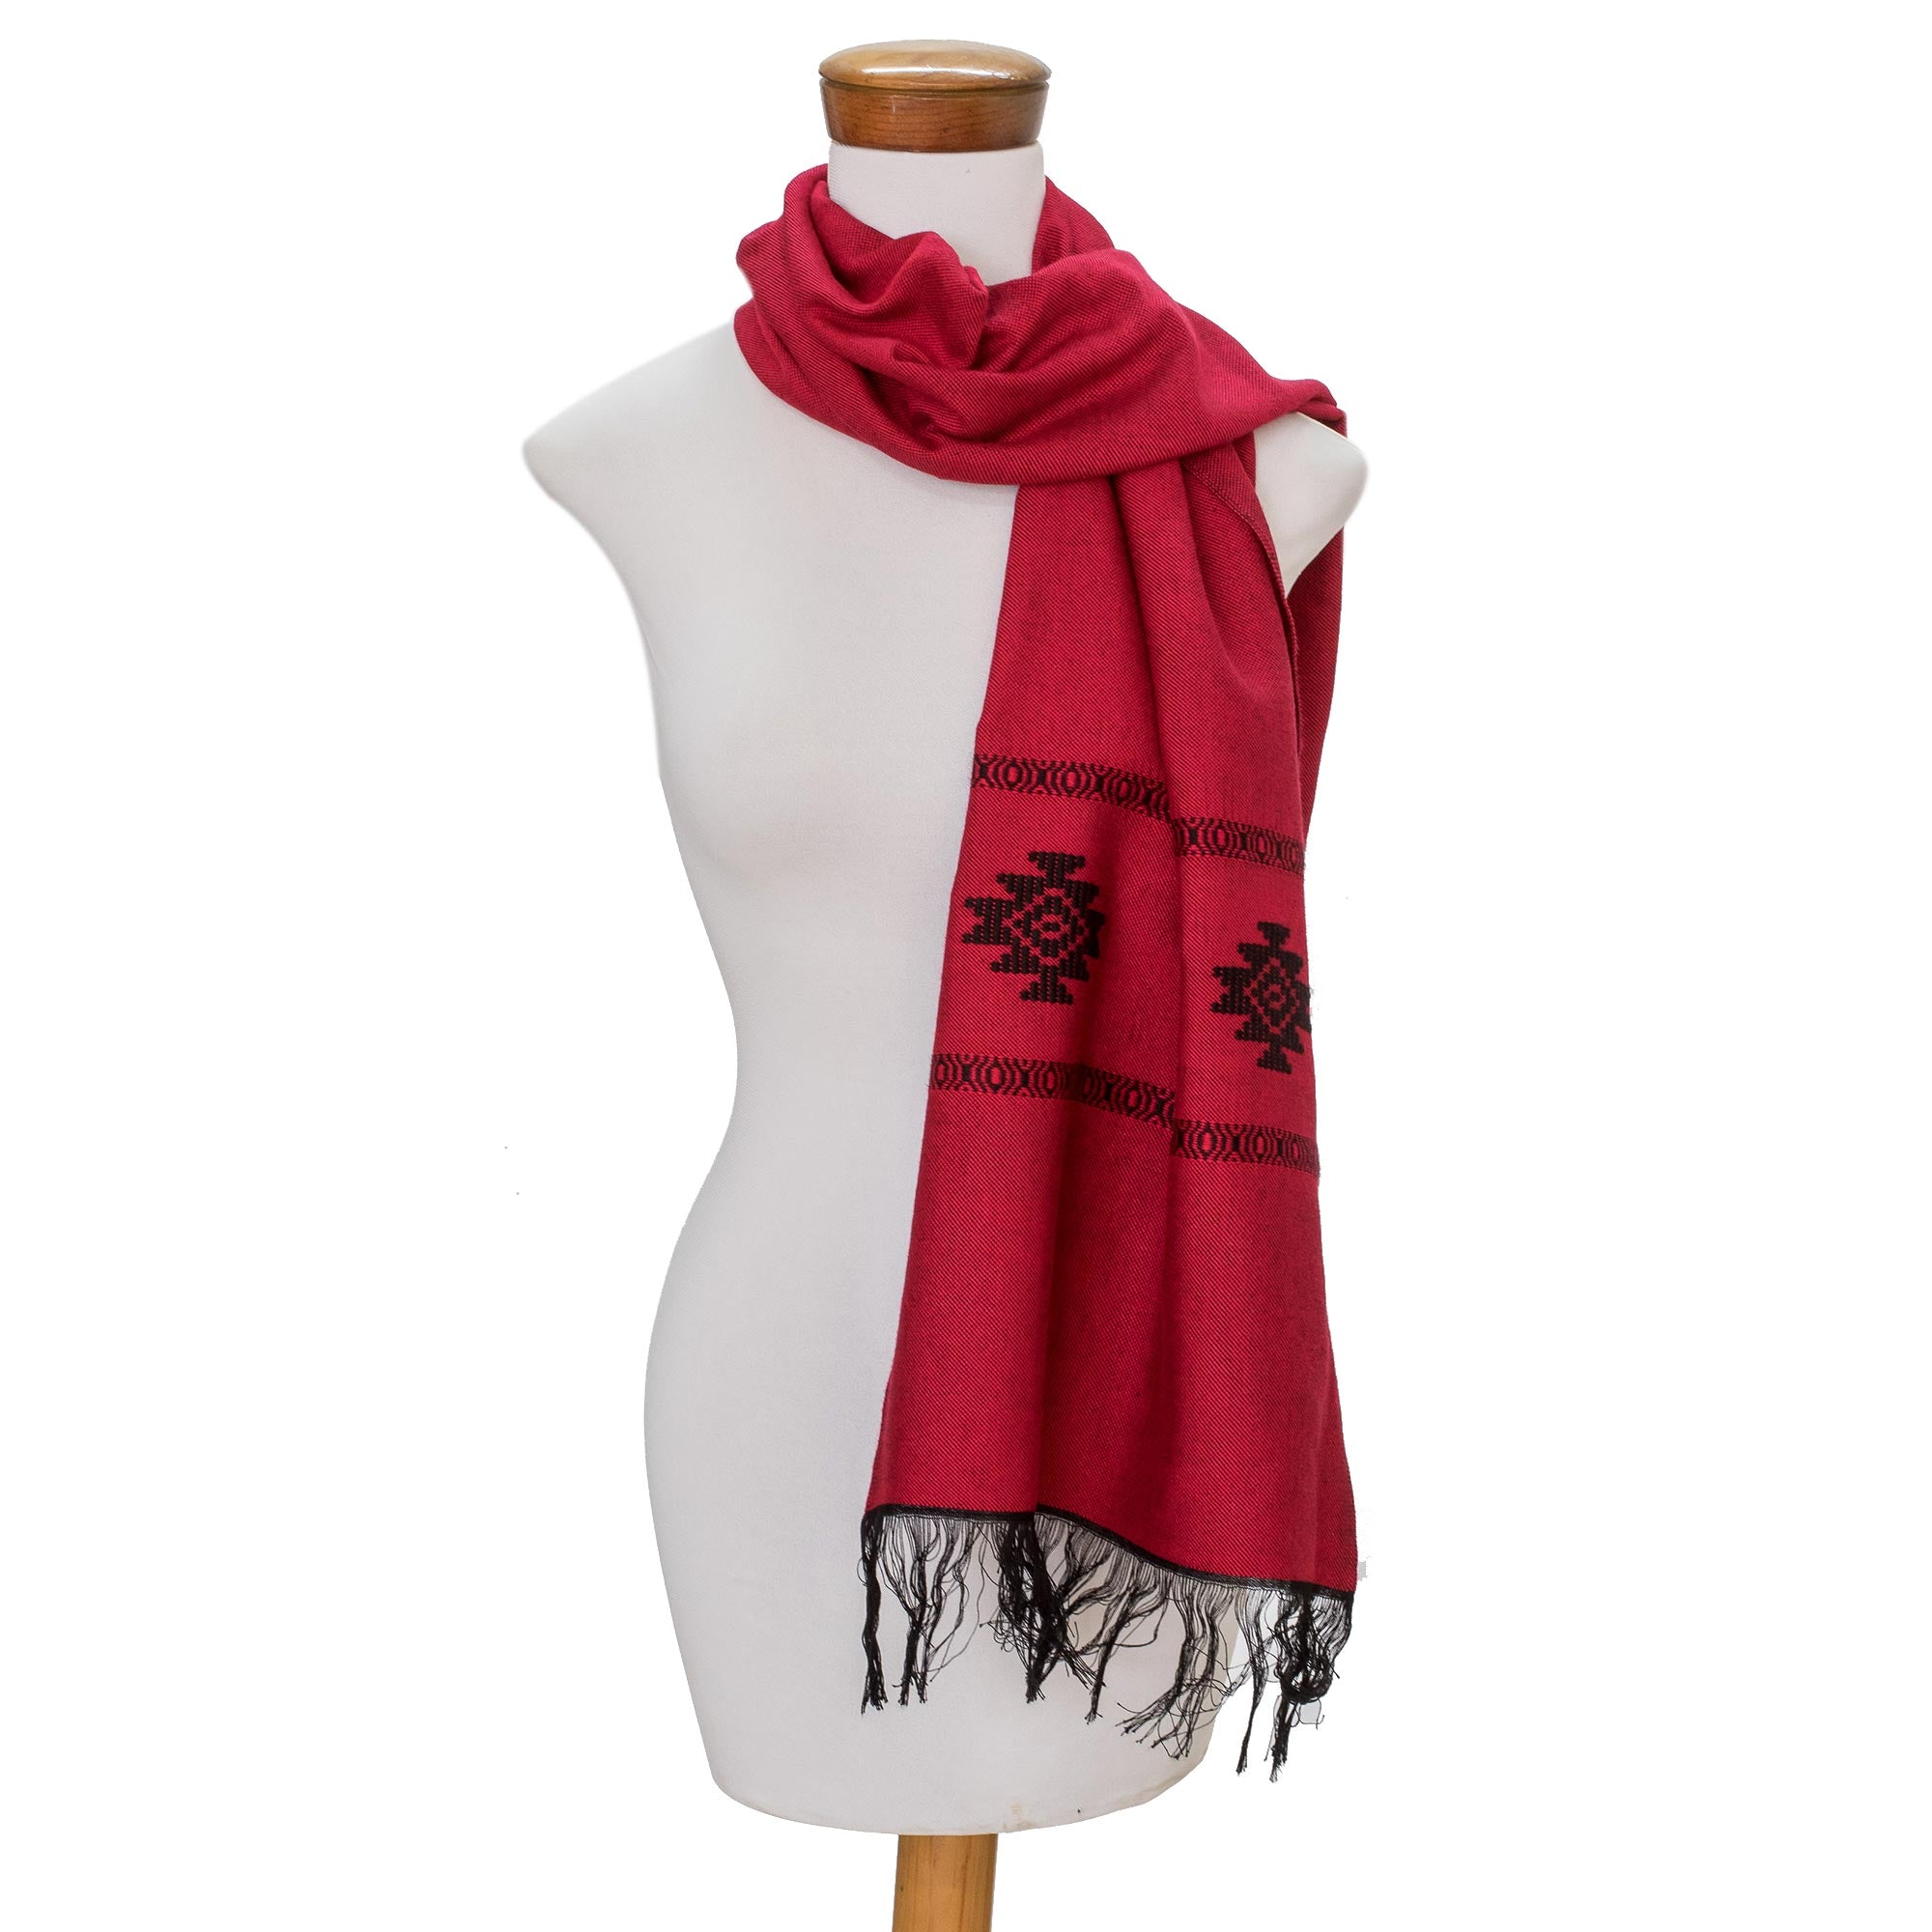 NOVICA Fret Chic In Red Red Cotton Blend Scarf With Black Stepped-Fret Rhombus Motif